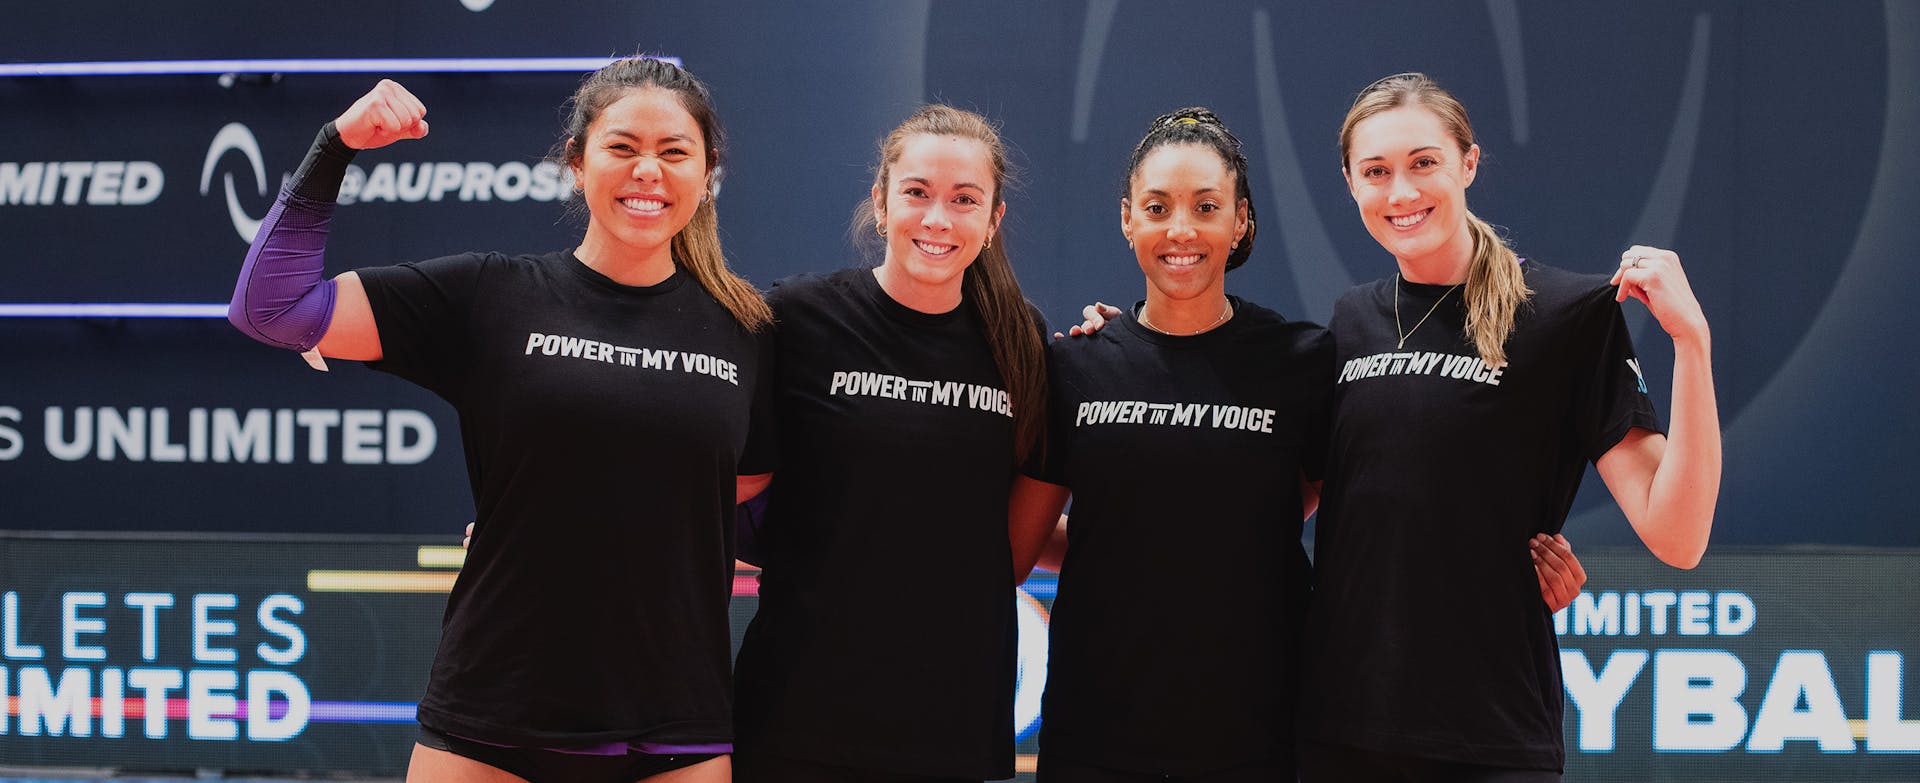 Athletes show off their Power in My Voice t-shirts. From left to right: Kalei Mau, Val Nichol, Aury Cruz, and Molly McCage